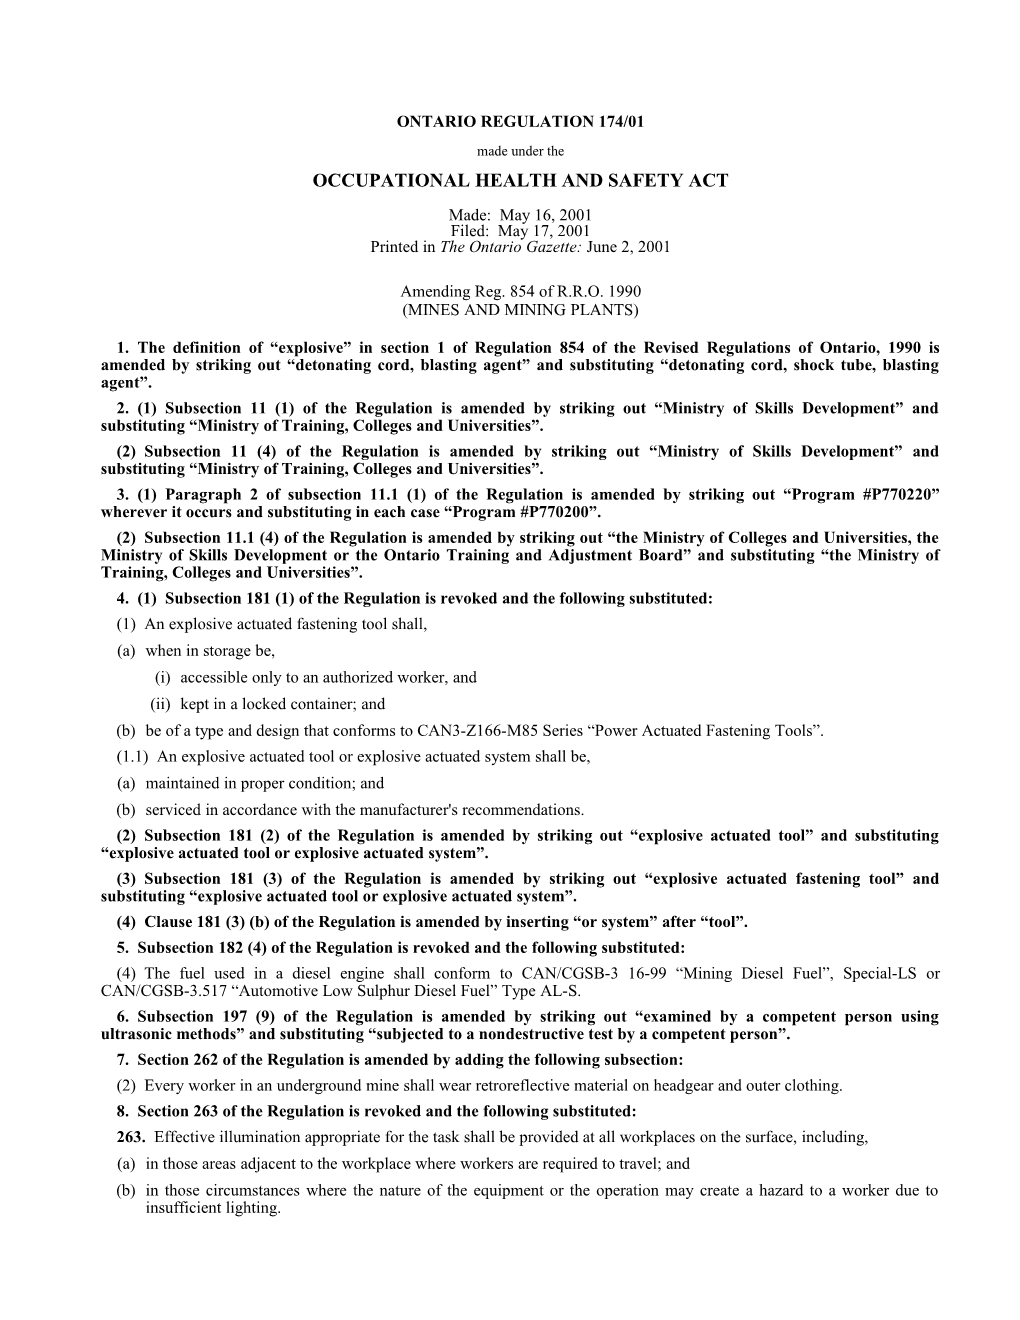 OCCUPATIONAL HEALTH and SAFETY ACT - O. Reg. 174/01